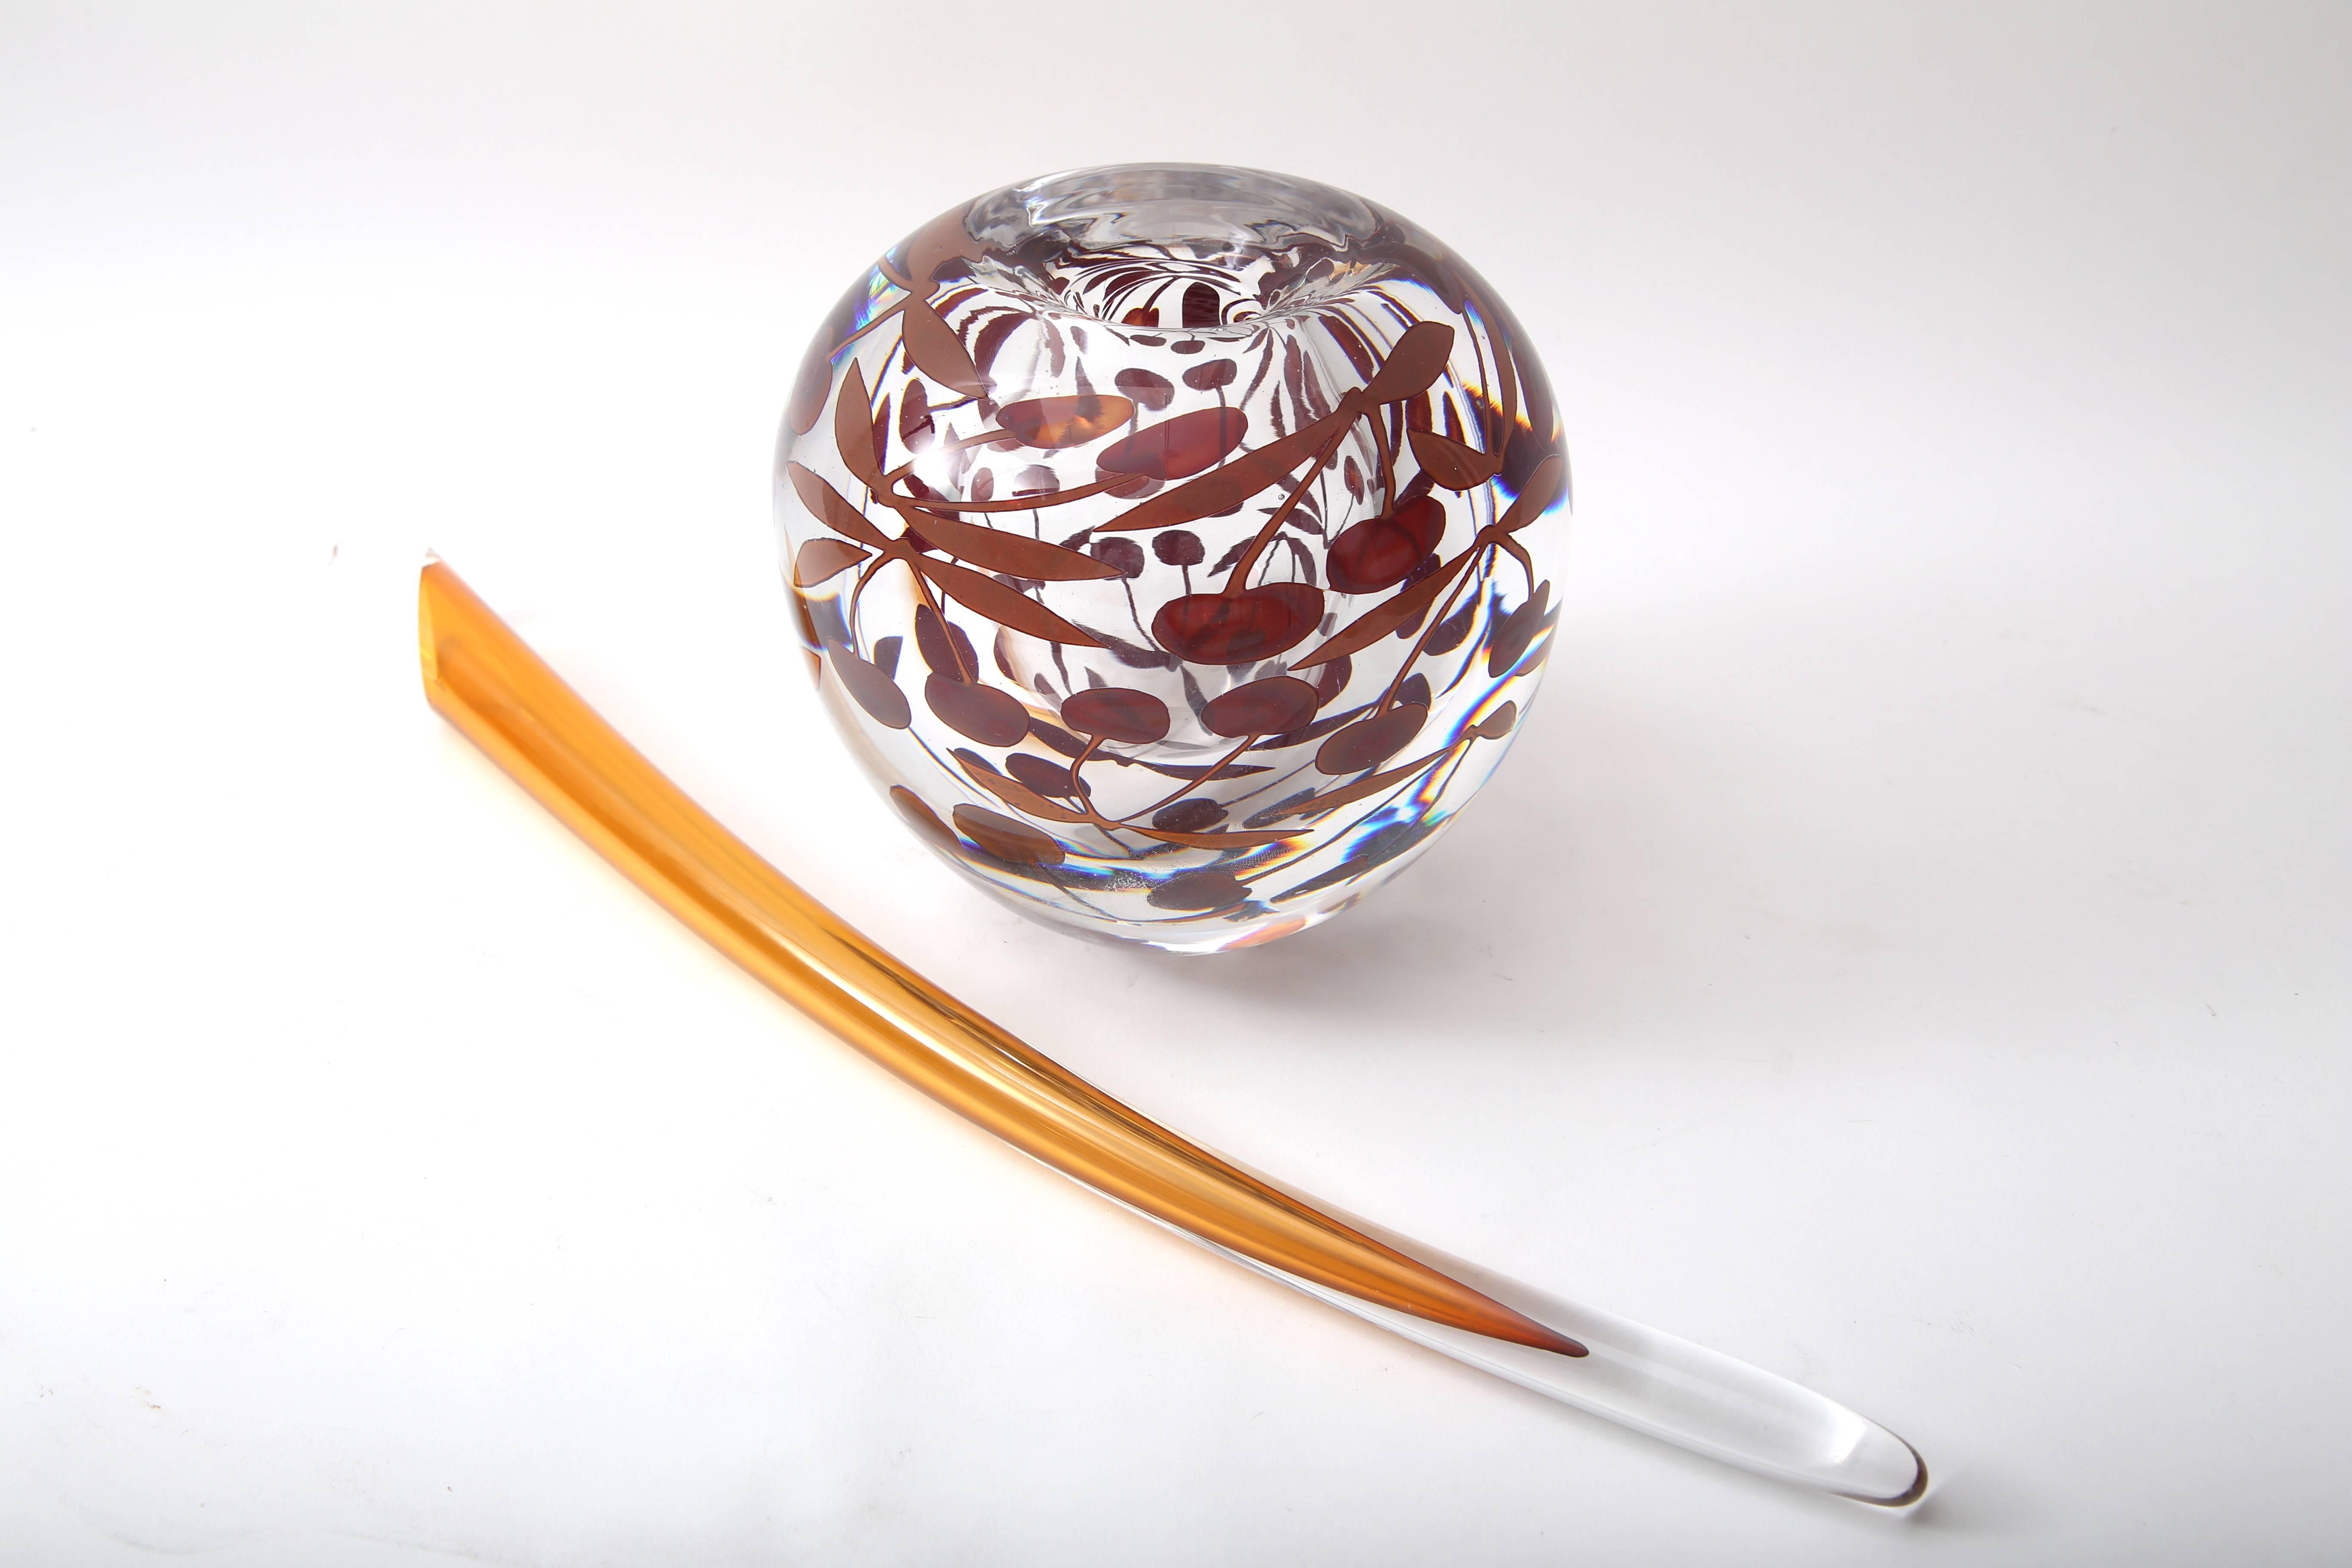 Hand-Crafted Artisan Glass Sculpture of a Cherry